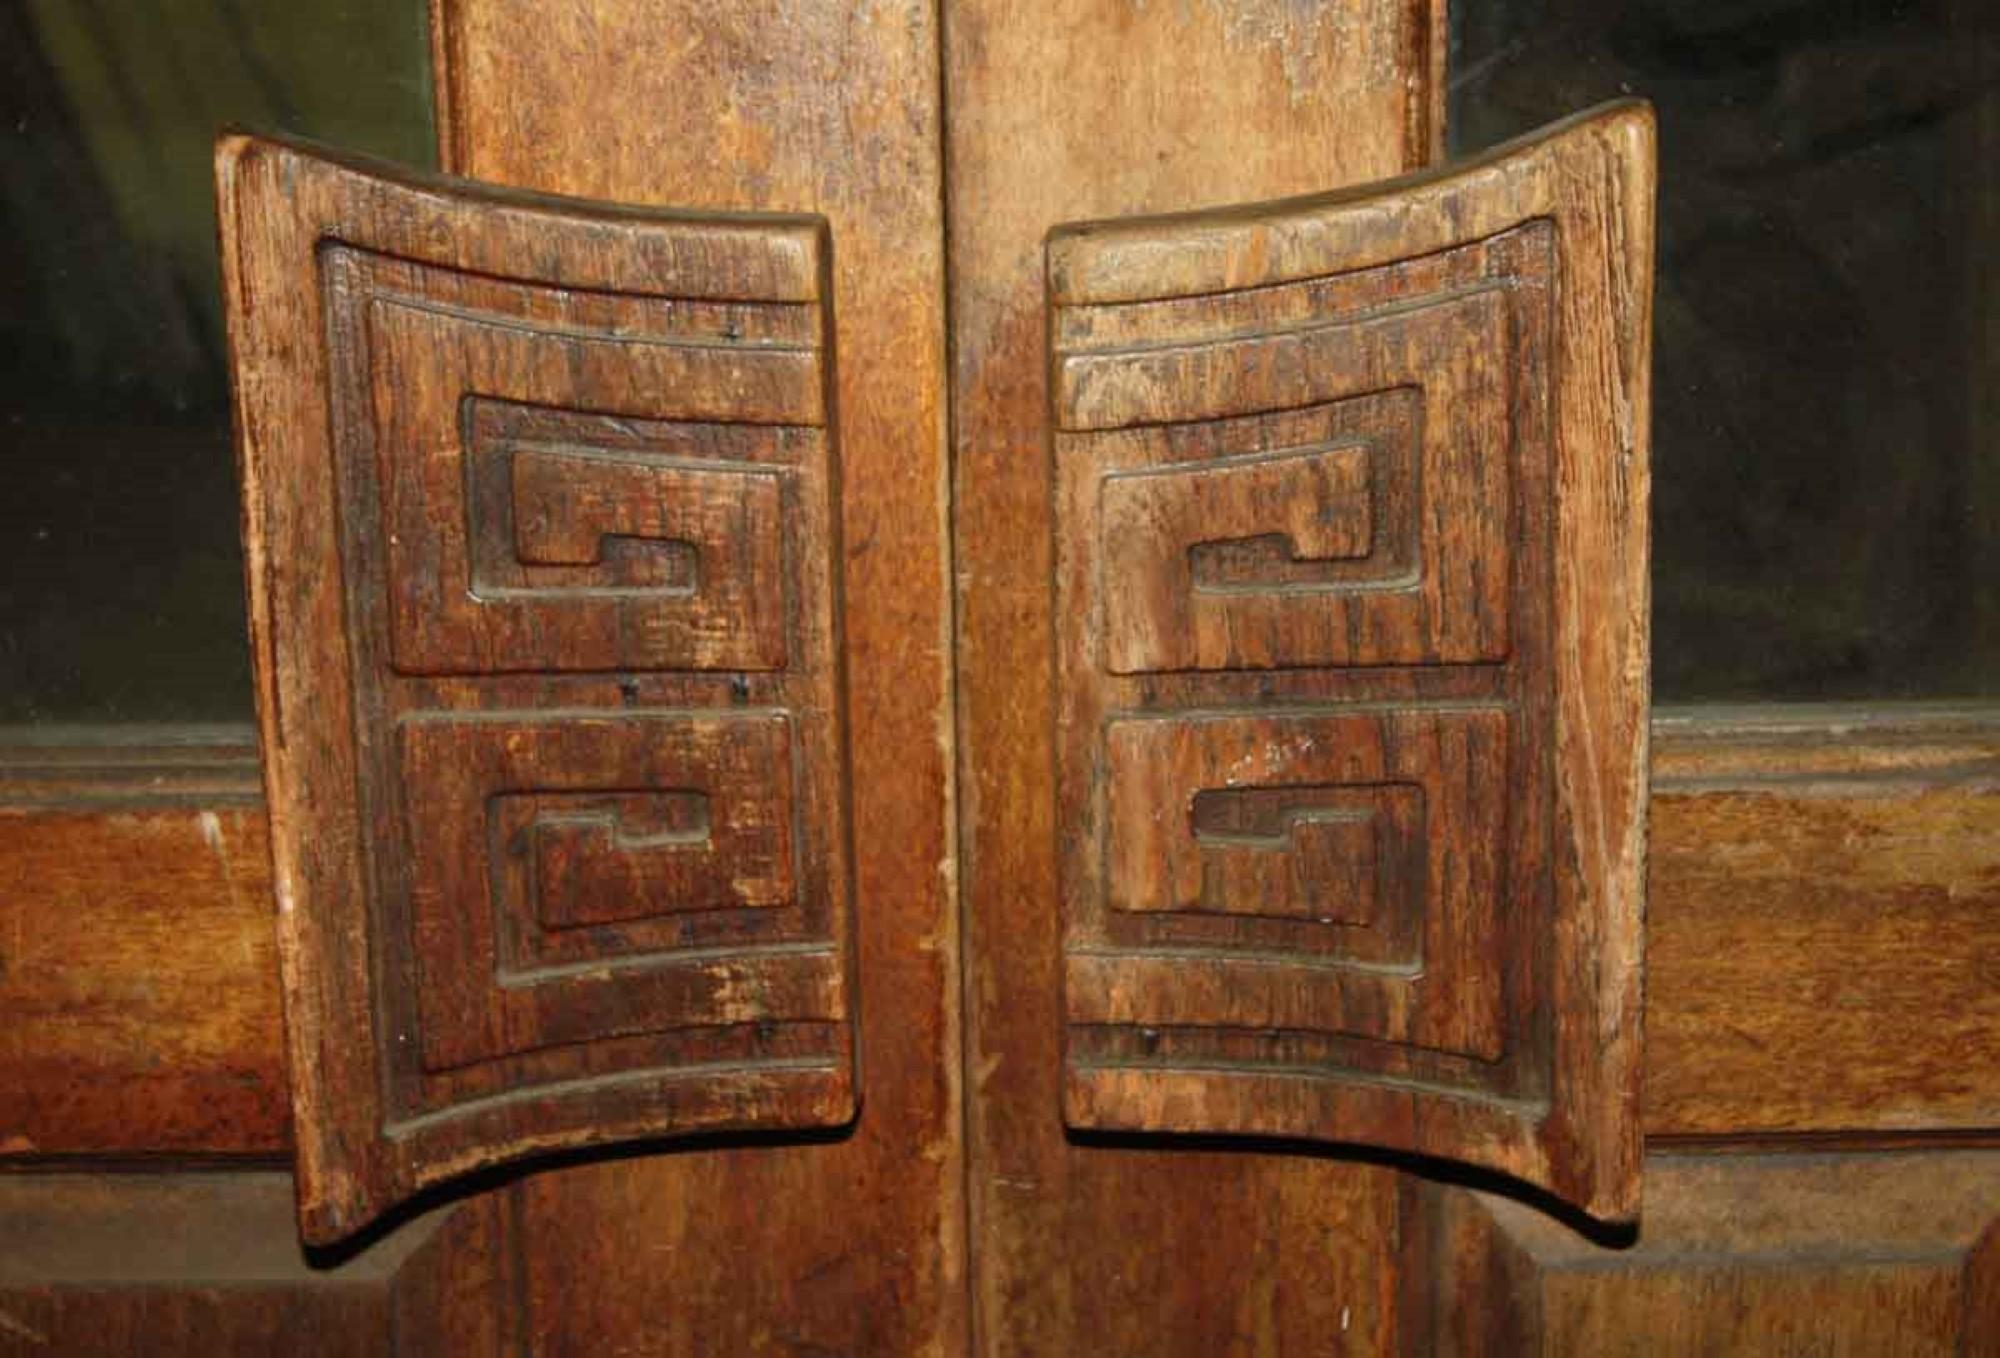 1940s tall dark tone 8-panel and 2 lite carved wood doors with carved handles as a focus point. Some original hardware is still attached. This can be seen at our 400 Gilligan St location in Scranton. PA.